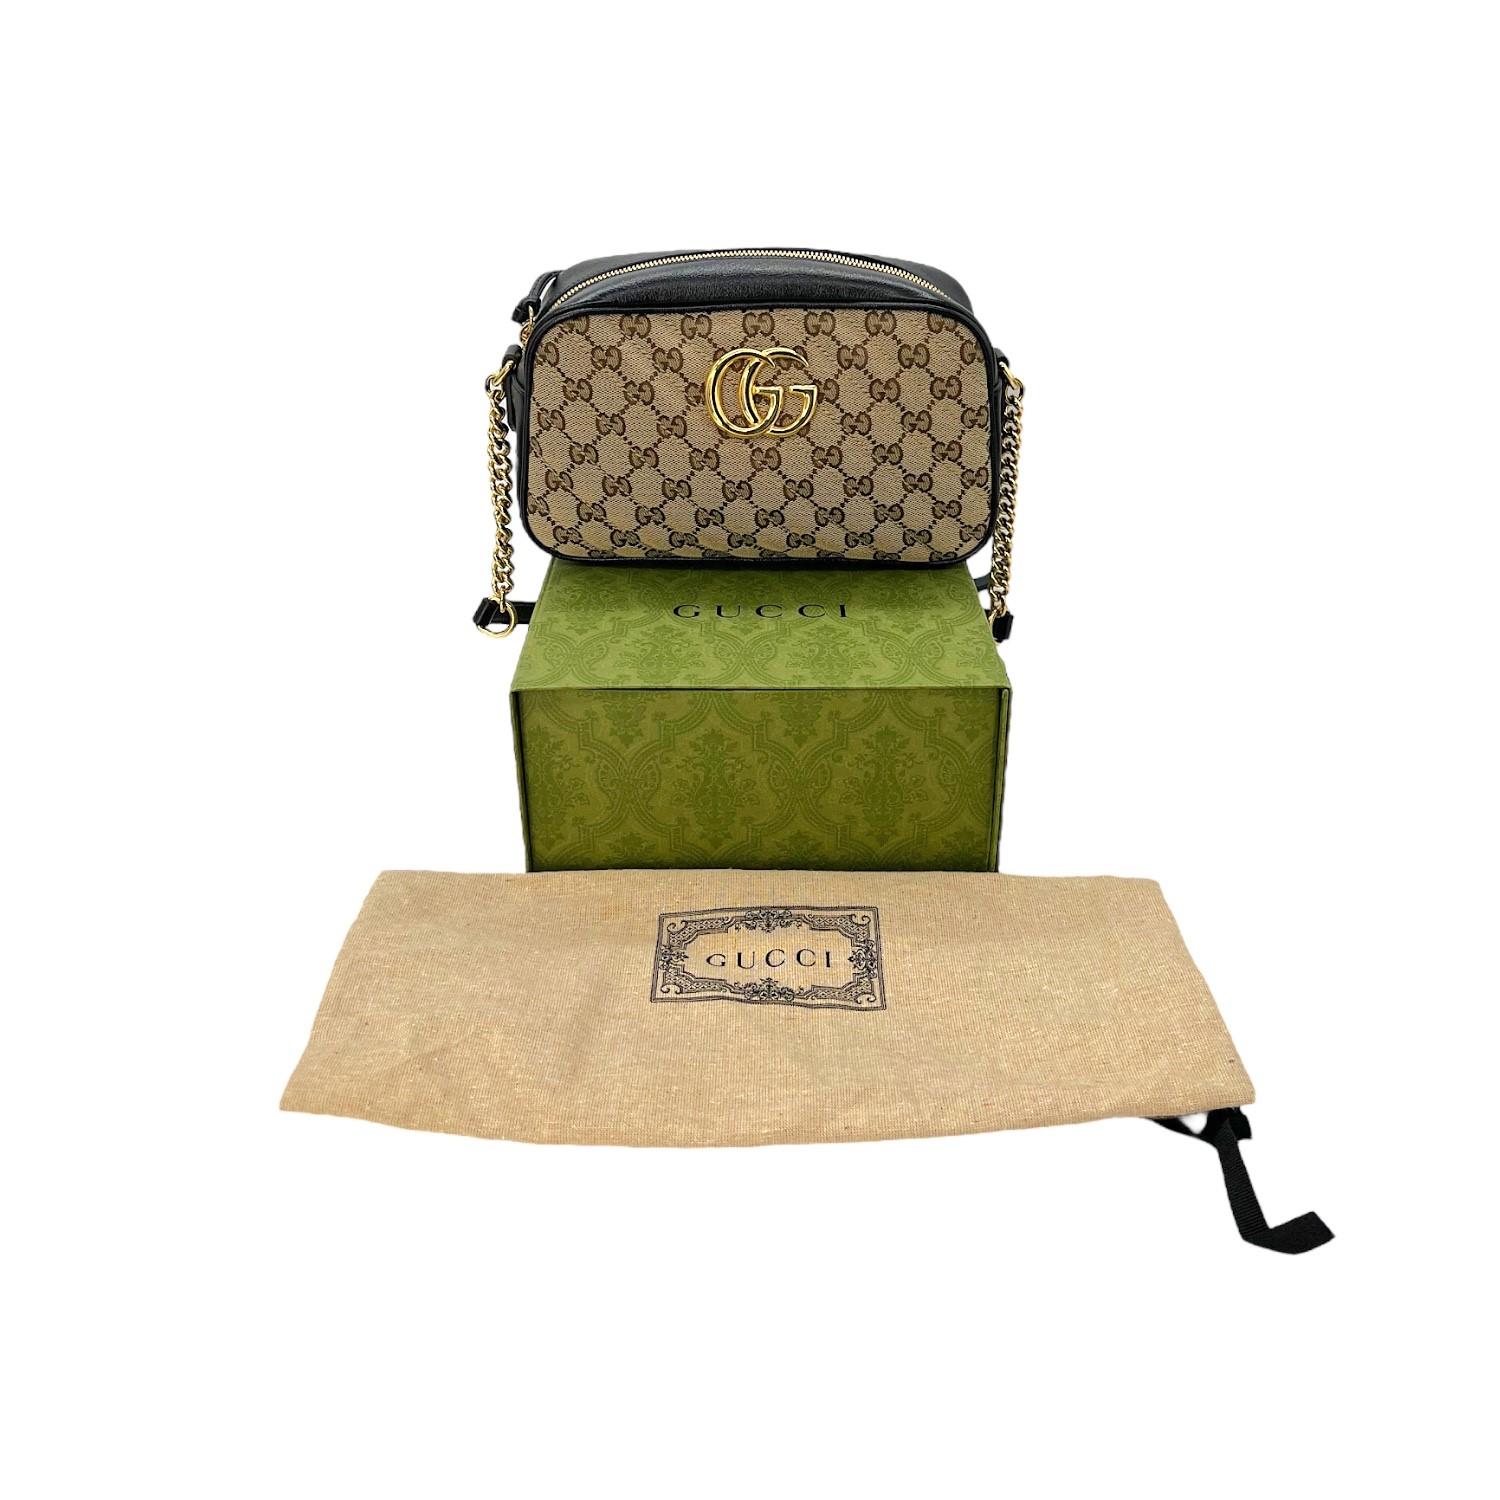 This Gucci GG Canvas Small Marmont Matelasse Camera Bag was made in Italy and it is crafted of the classic Gucci GG Monogram canvas with black leather and gold-tone hardware features. It has an adjustable flat shoulder strap. It has a zipper closure